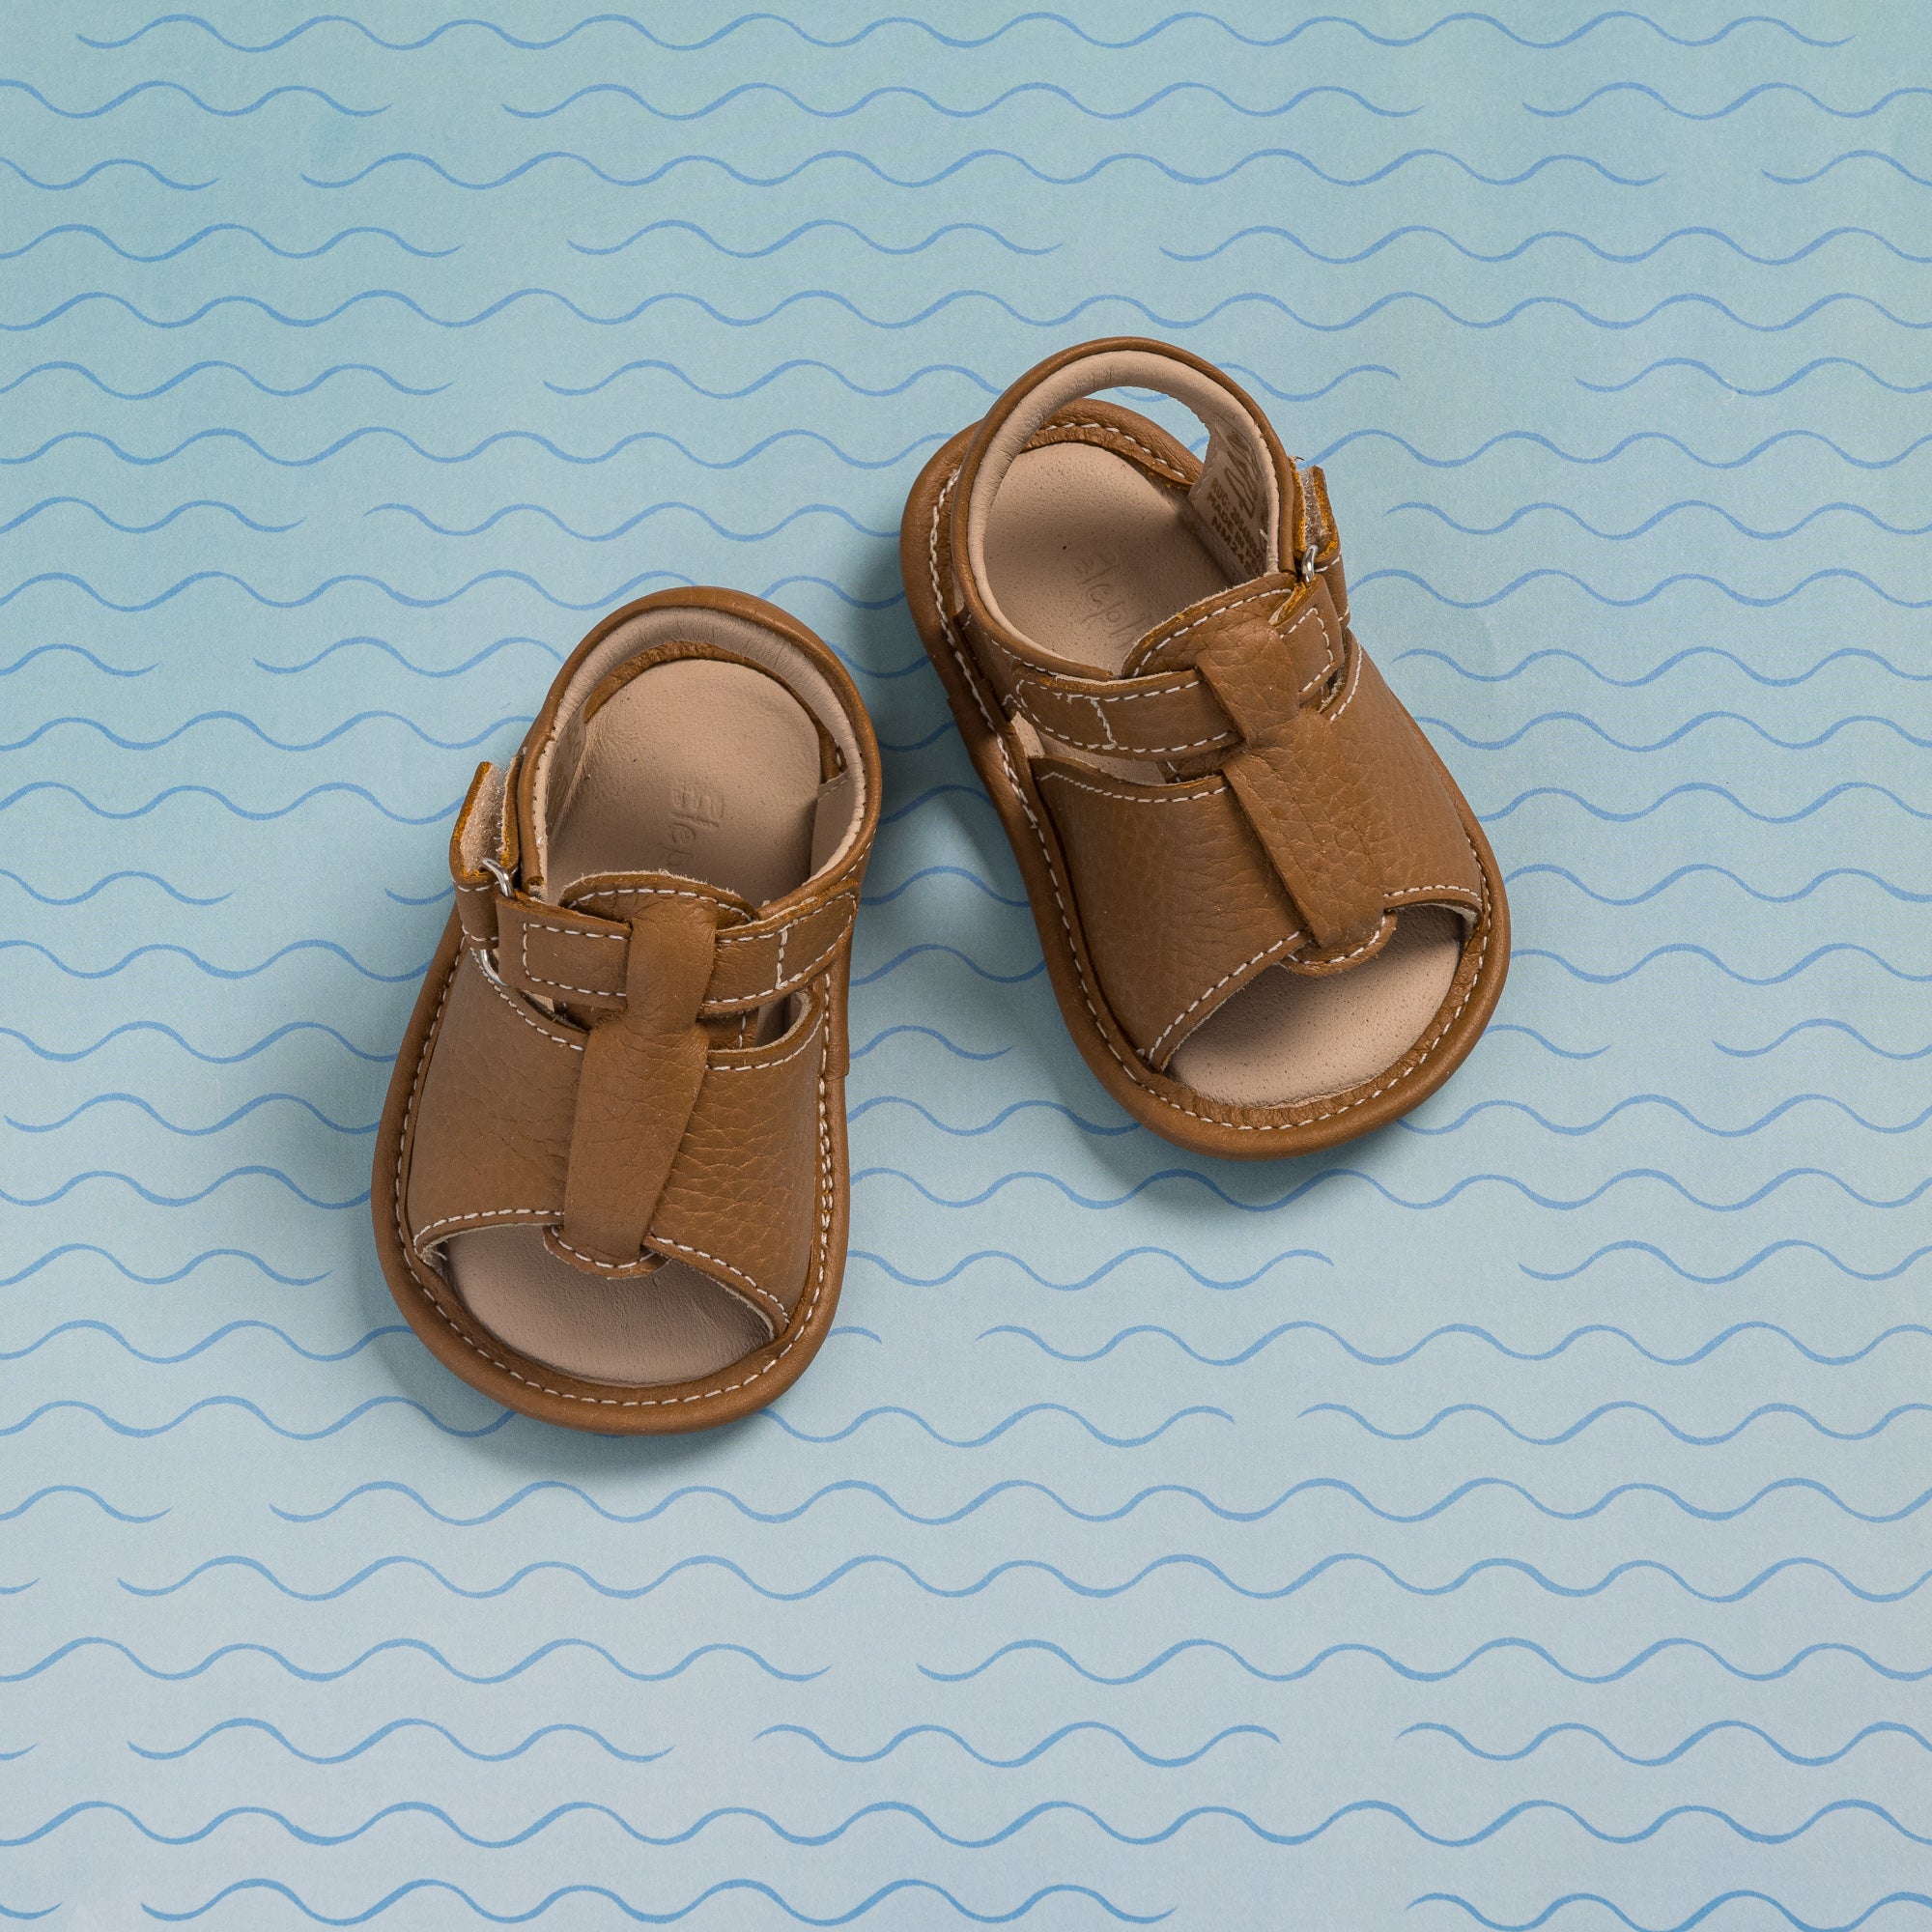 Leather Sandals - Purebaby